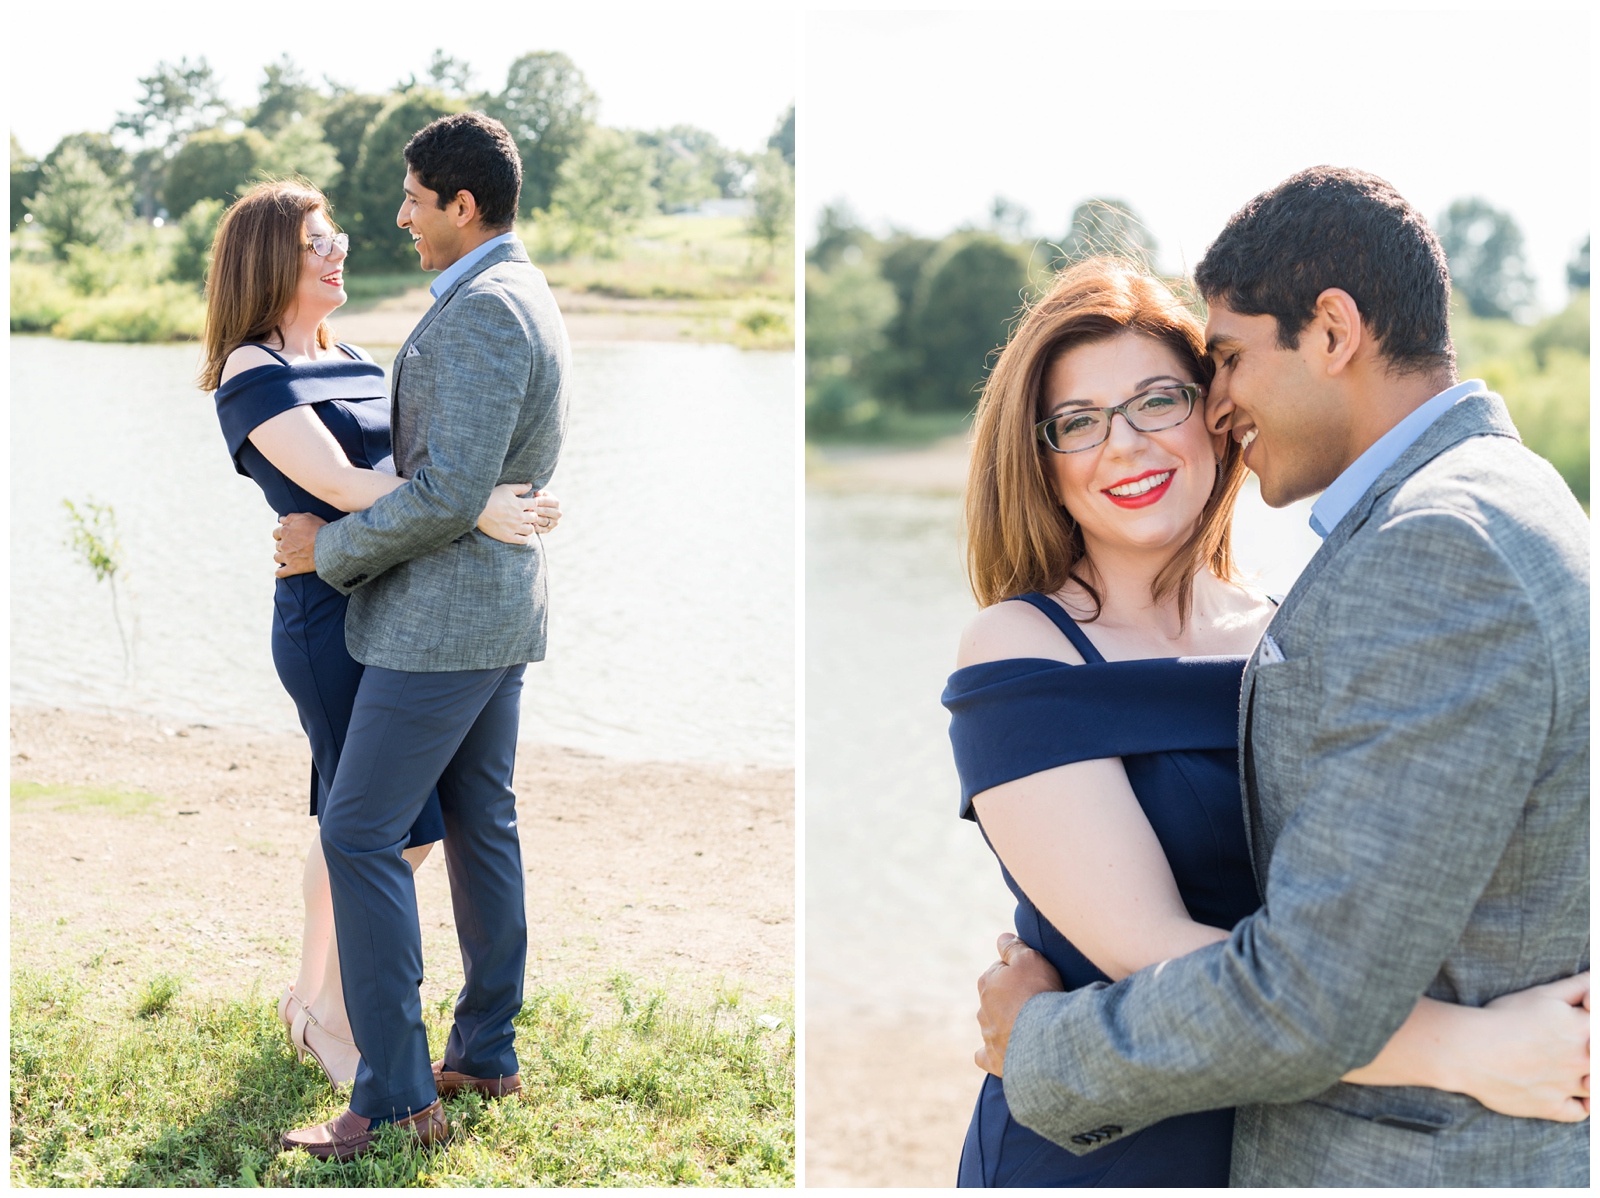 summer engagement portraits by the water at Hoover Reservoir with bride and groom in navy blue